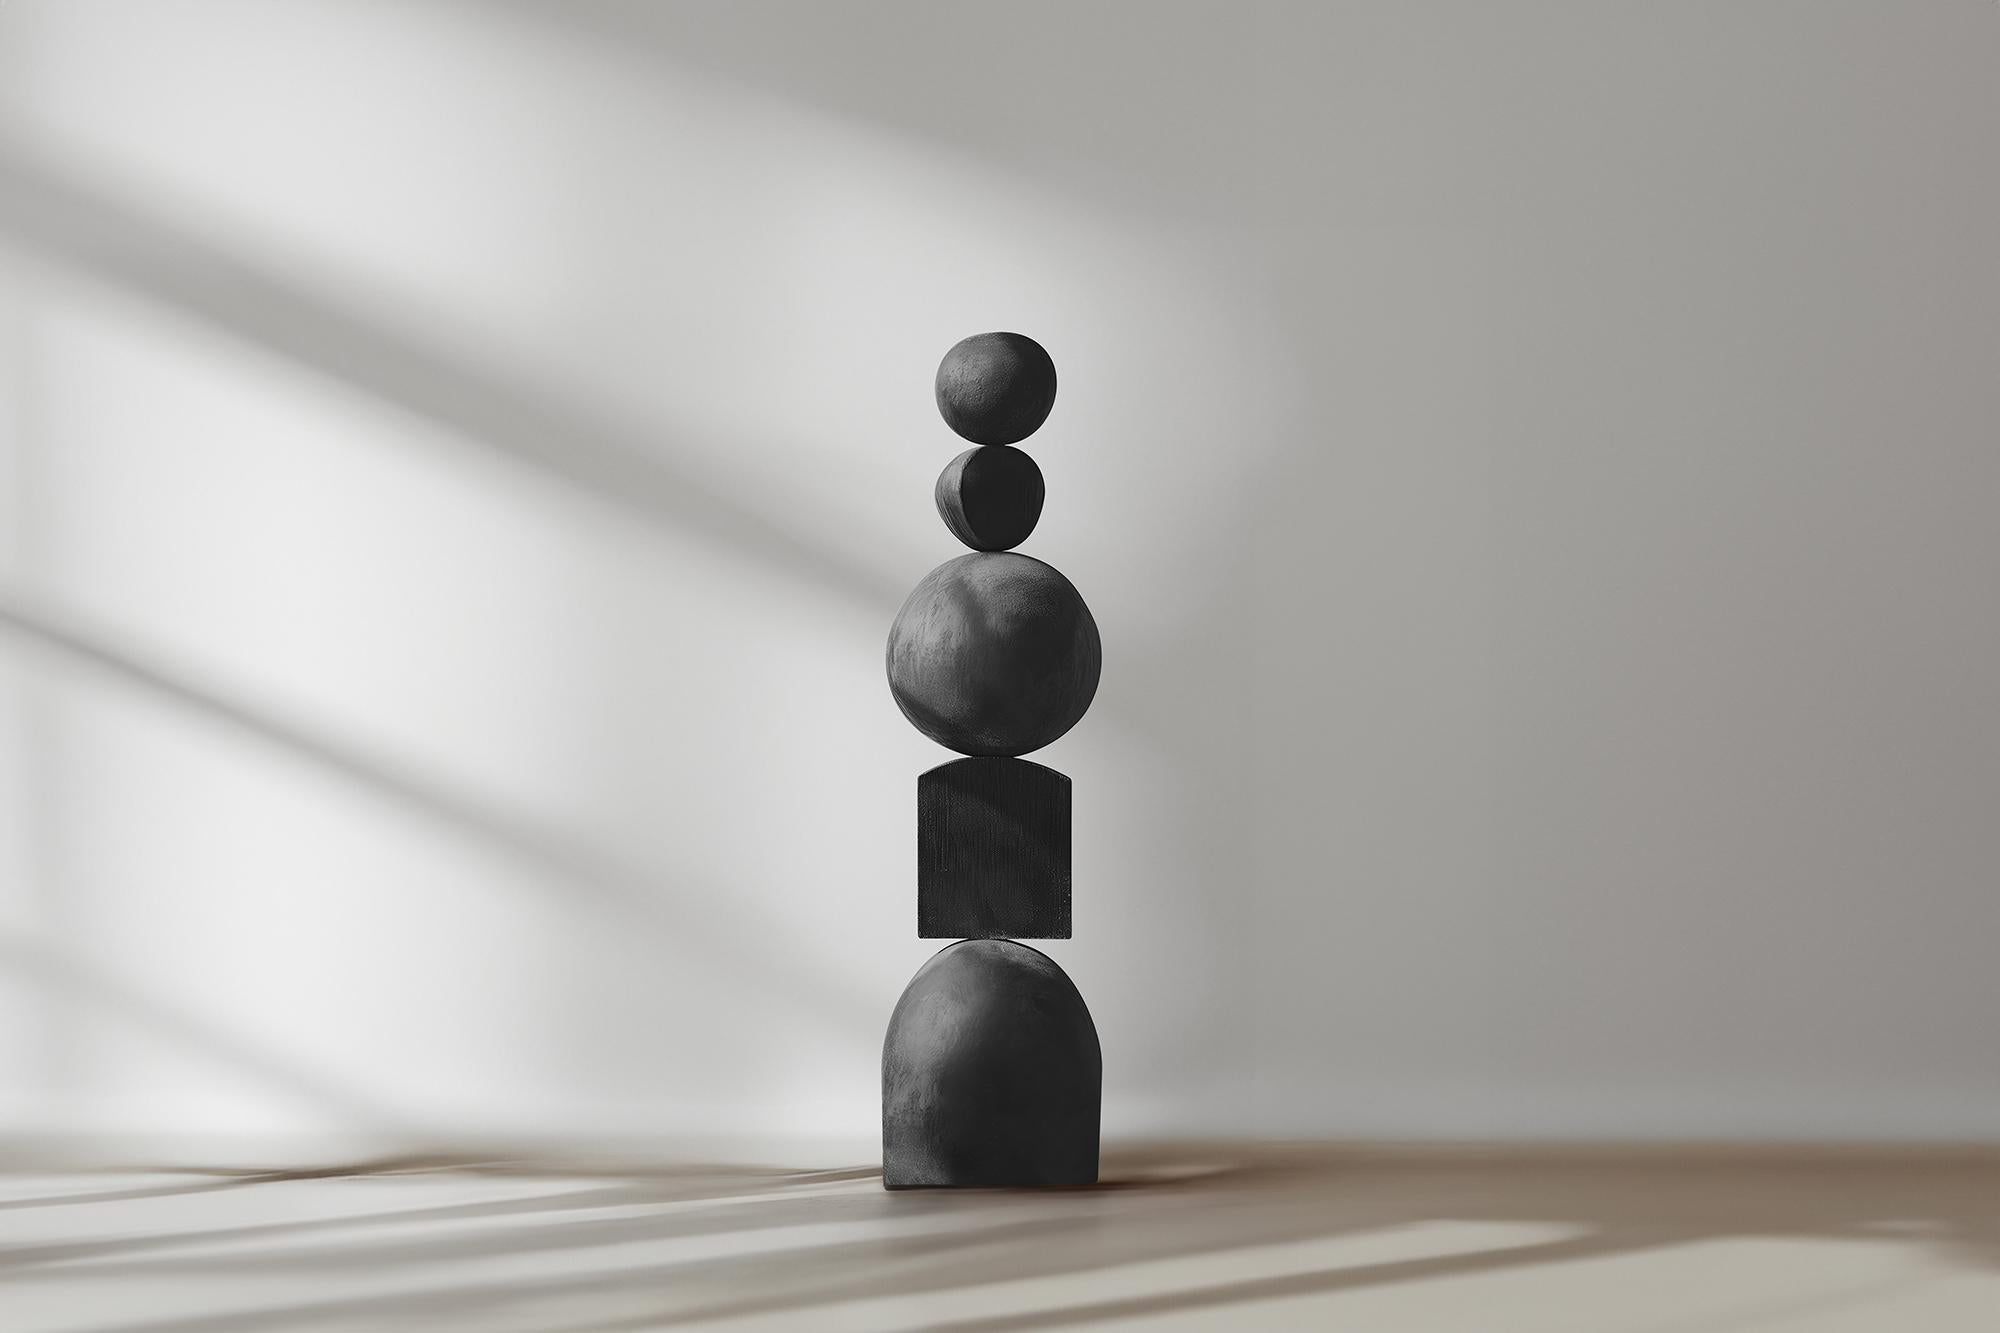 Dark Elegance Carved in Black Solid Wood, NONO's Still Stand No86
——

Joel Escalona's wooden standing sculptures are objects of raw beauty and serene grace. Each one is a testament to the power of the material, with smooth curves that flow into one